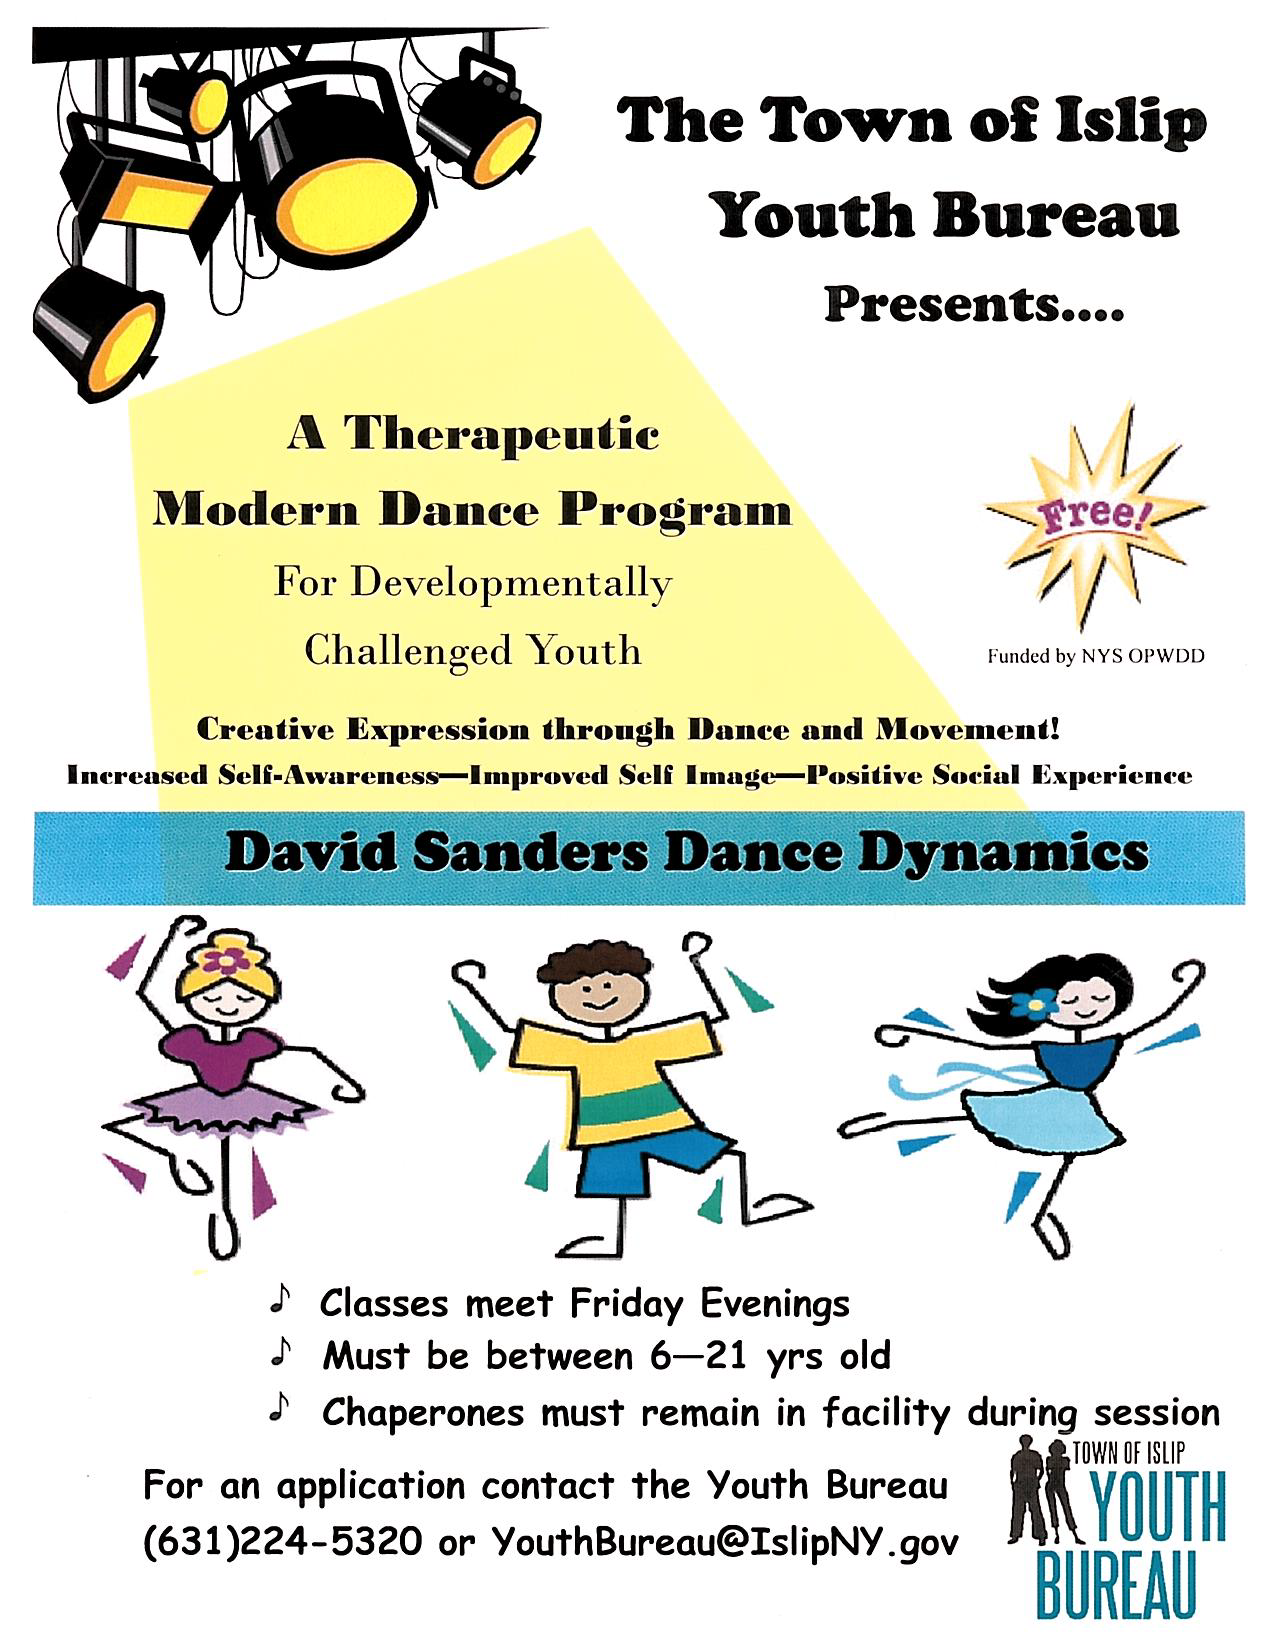 A flyer of 3 dancing children, announcing the free theraputic modern dance program. For more information please call the Youth Bureau at (631)224-5320